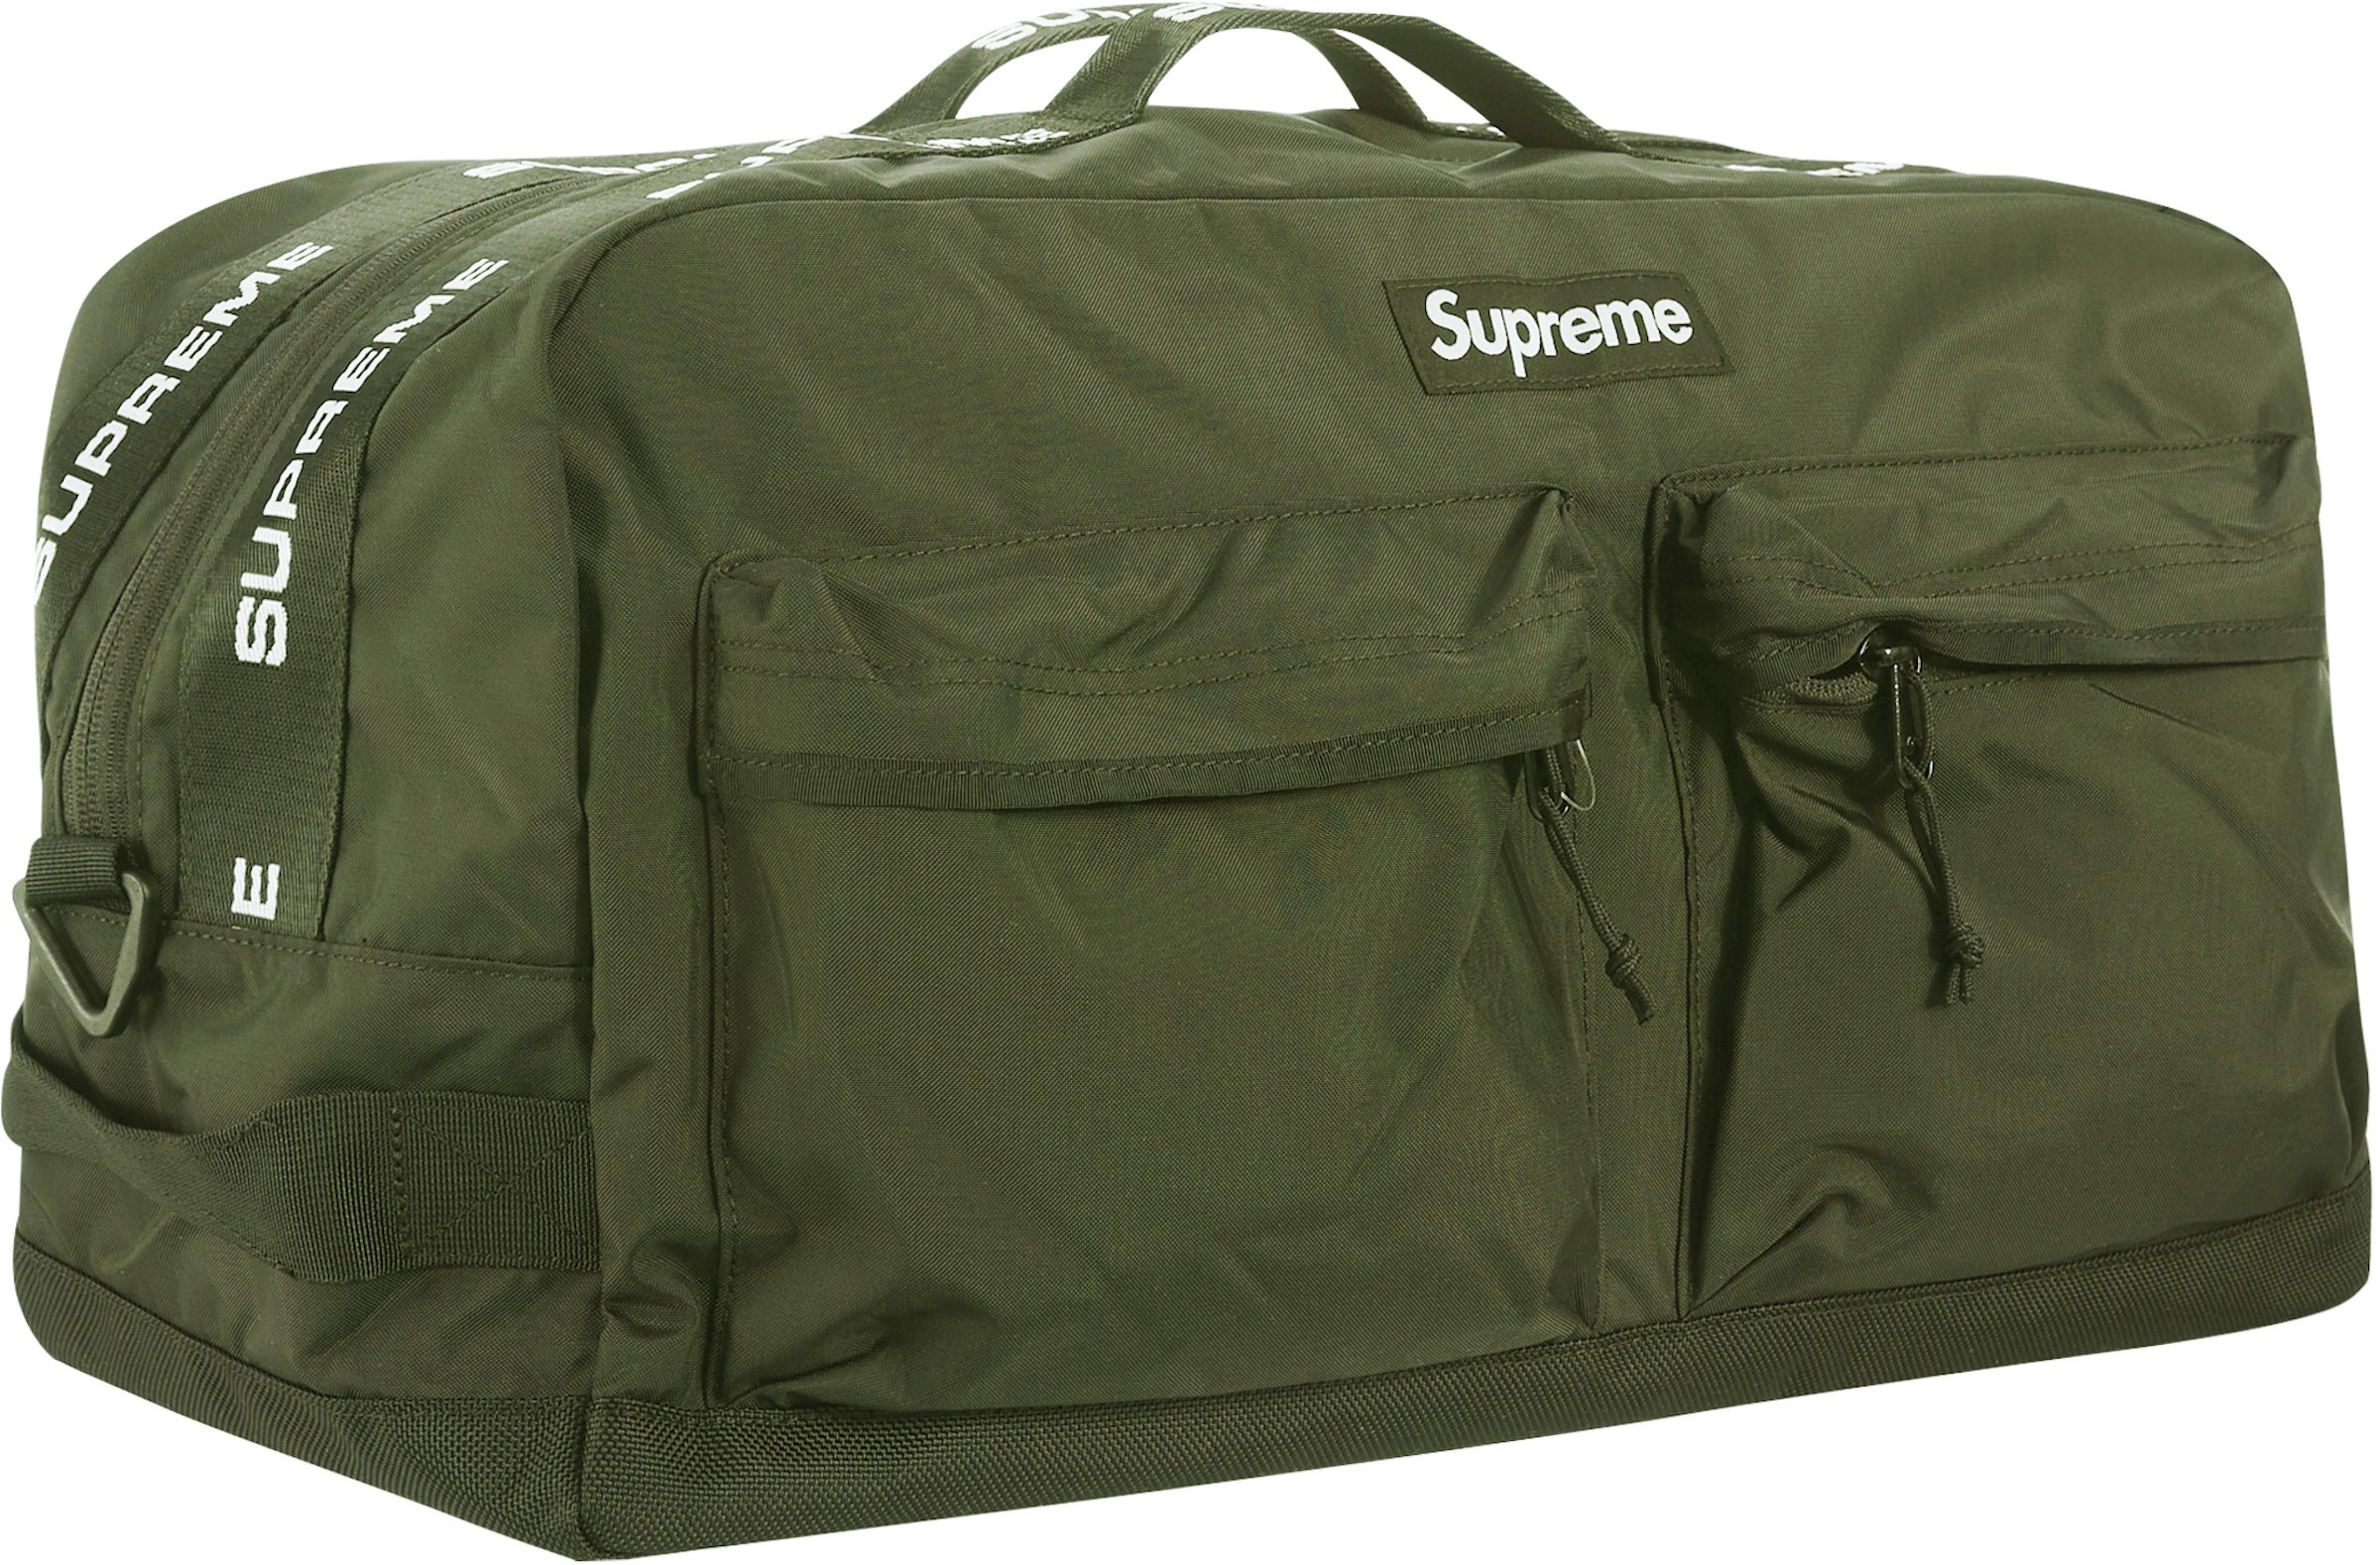 Men's Supreme Bags from $205